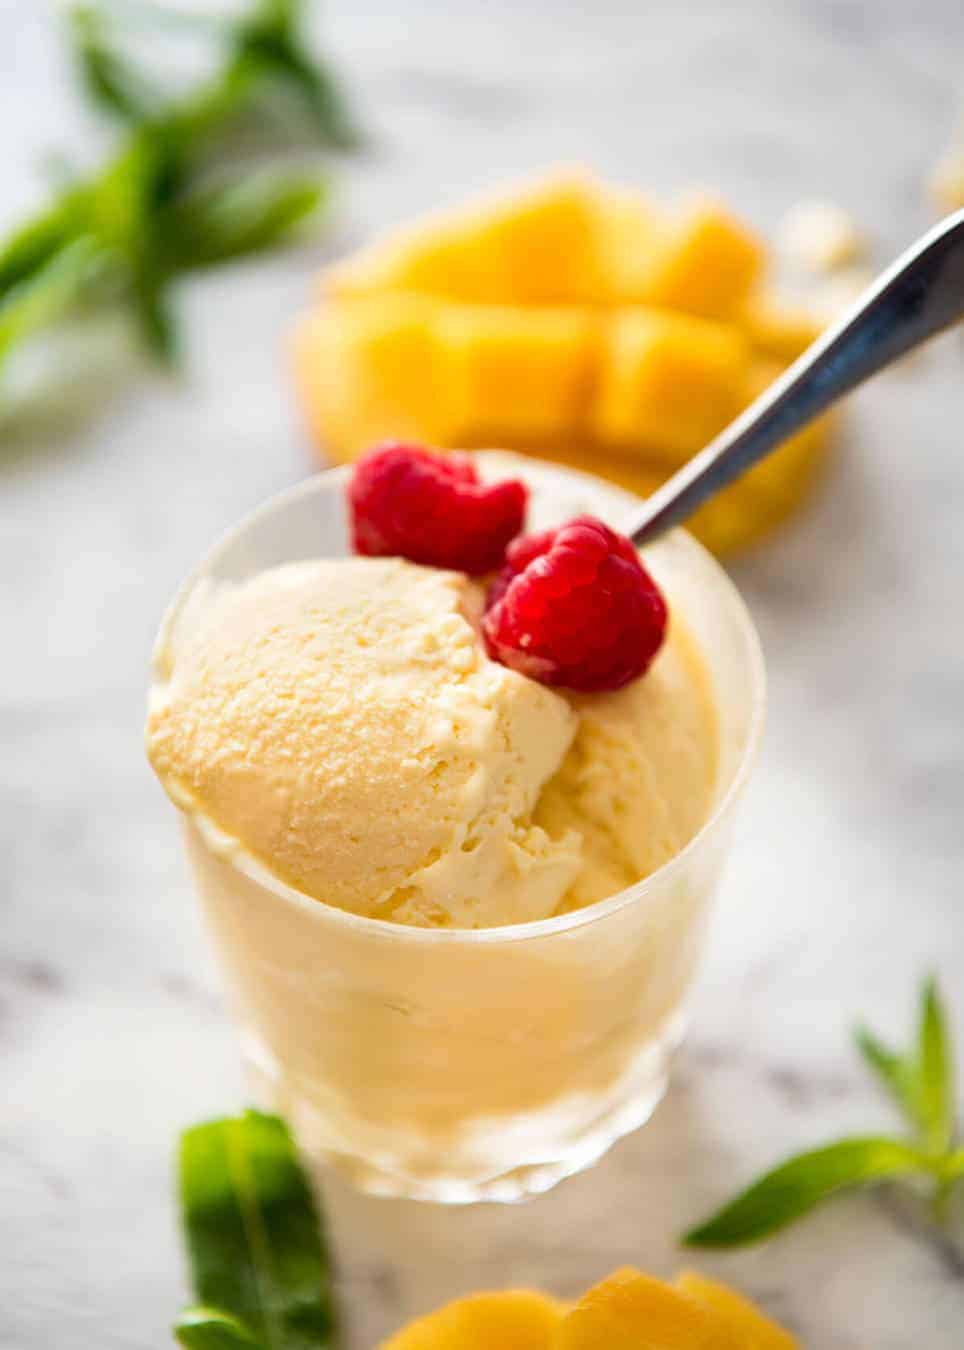 A glass with scoops of homemade Mango Ice Cream garnished with fresh raspberries.